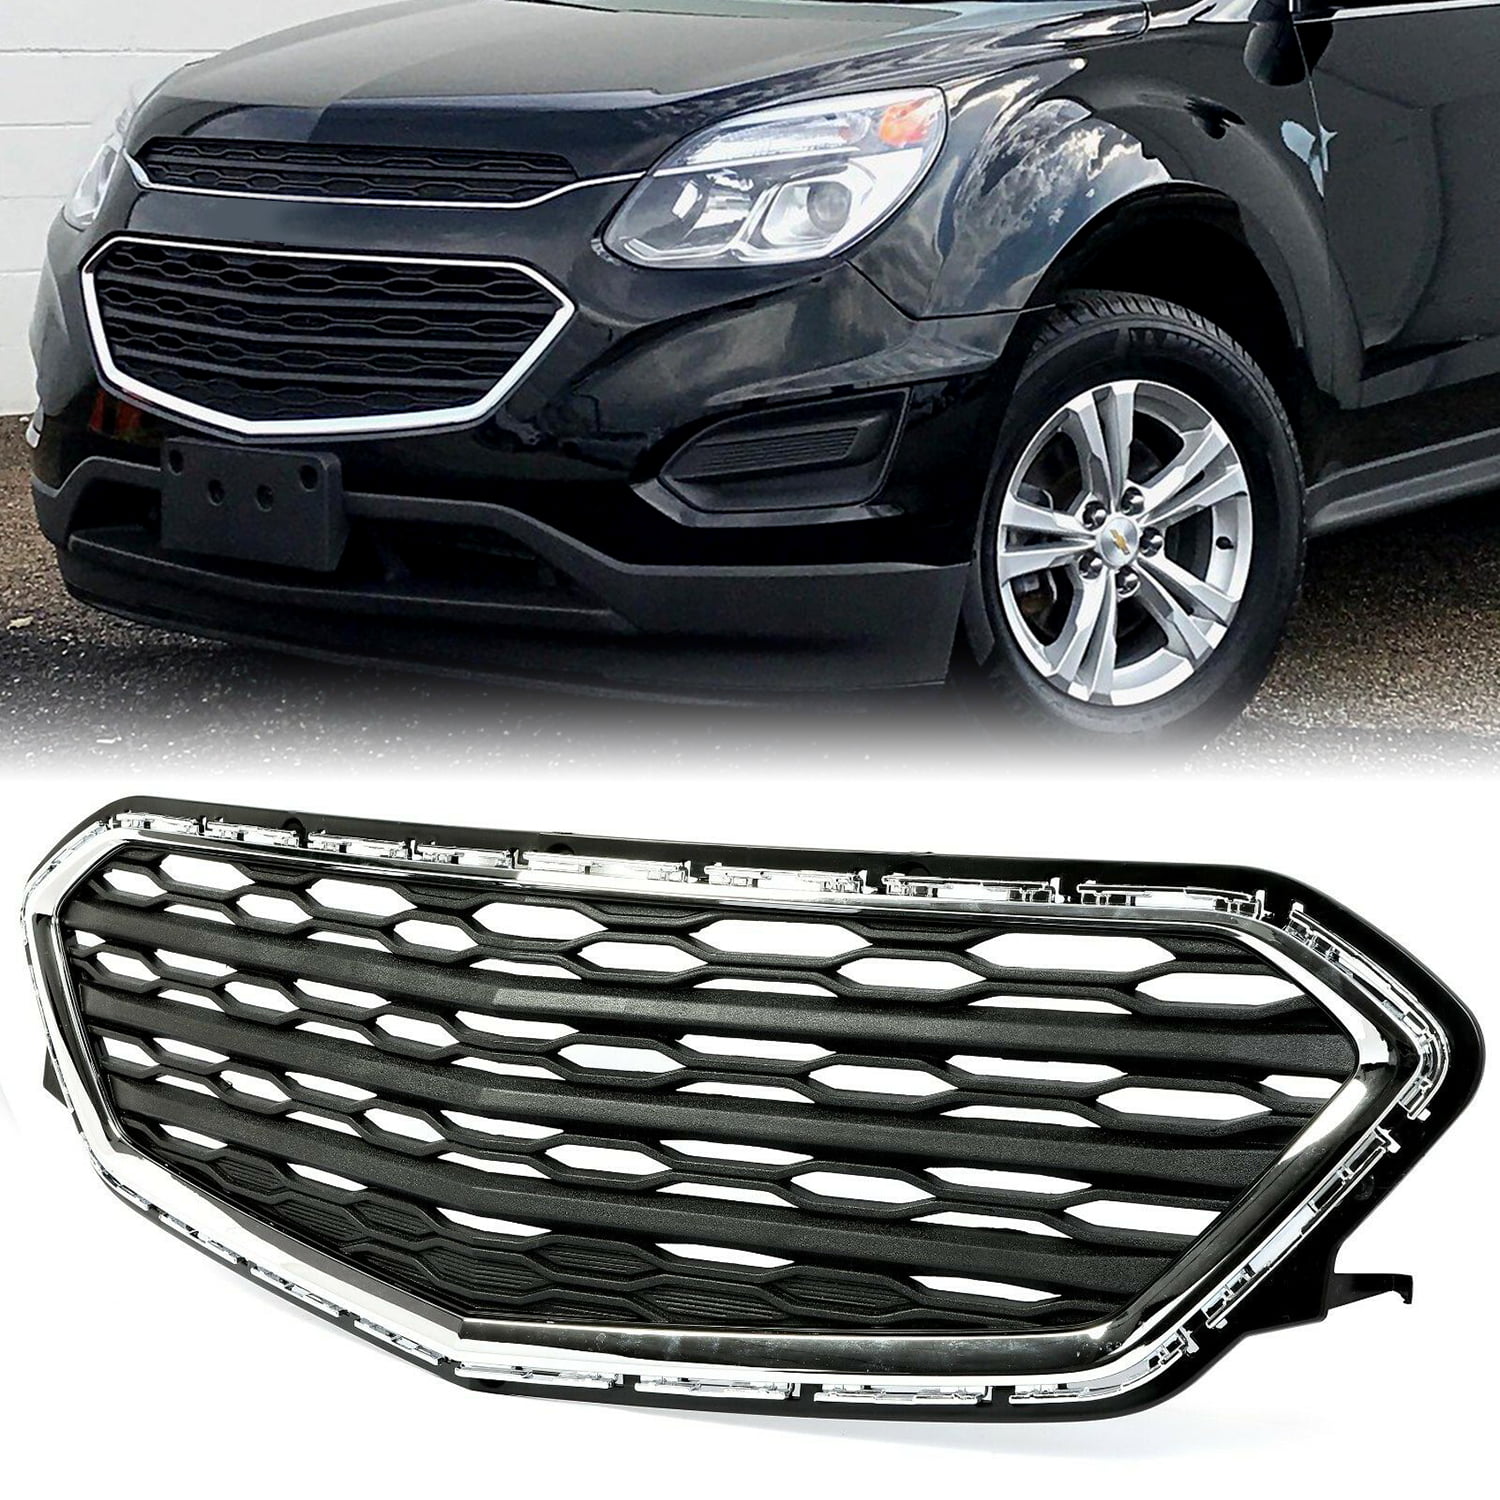 PERFIT LINER New Replacement Parts Front Chrome Grille Grill Molding Compatible With Chevy Equinox 2005 2006 2007 2008 2009 Fits GM1210106 25906306 